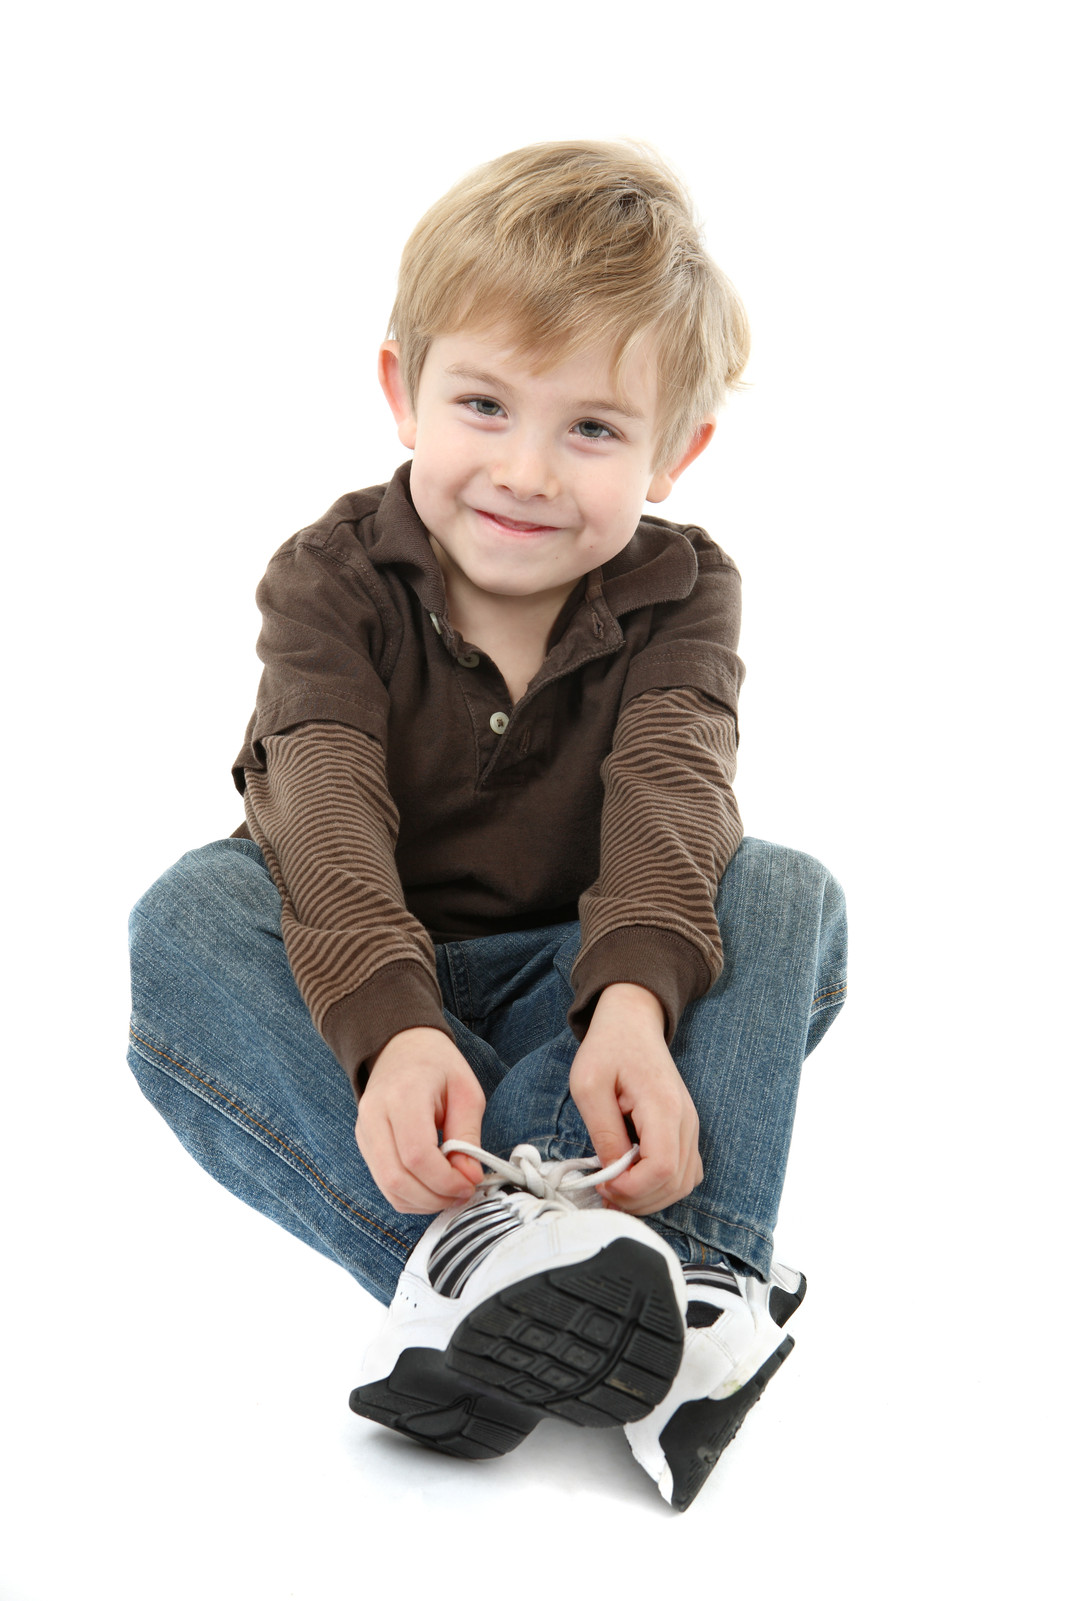 responses to â€œ Bring shoesâ€”and smilesâ€”to kids in need! â€